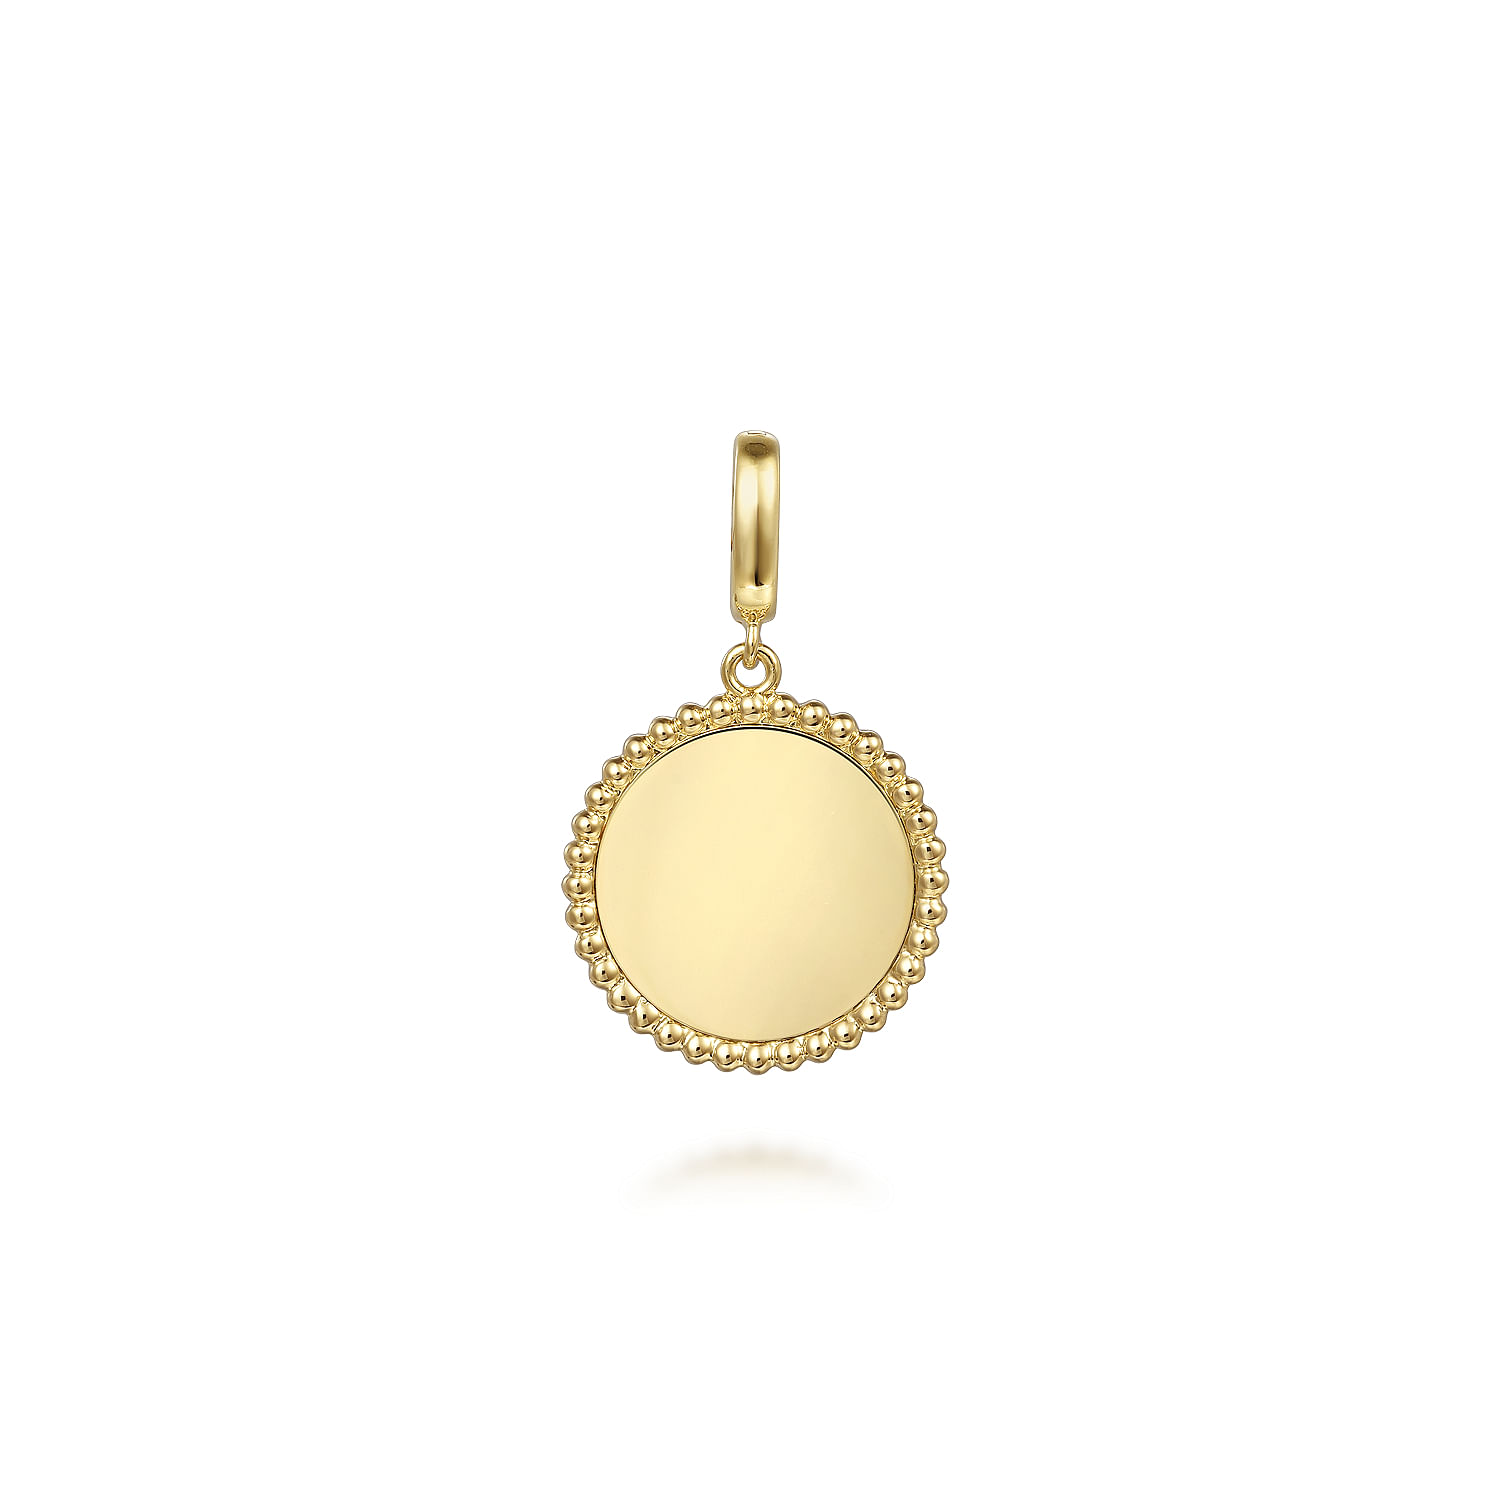 Gabriel - 14K Yellow Gold Bujukan Round Personalized Medallion Pendant in size 18mm